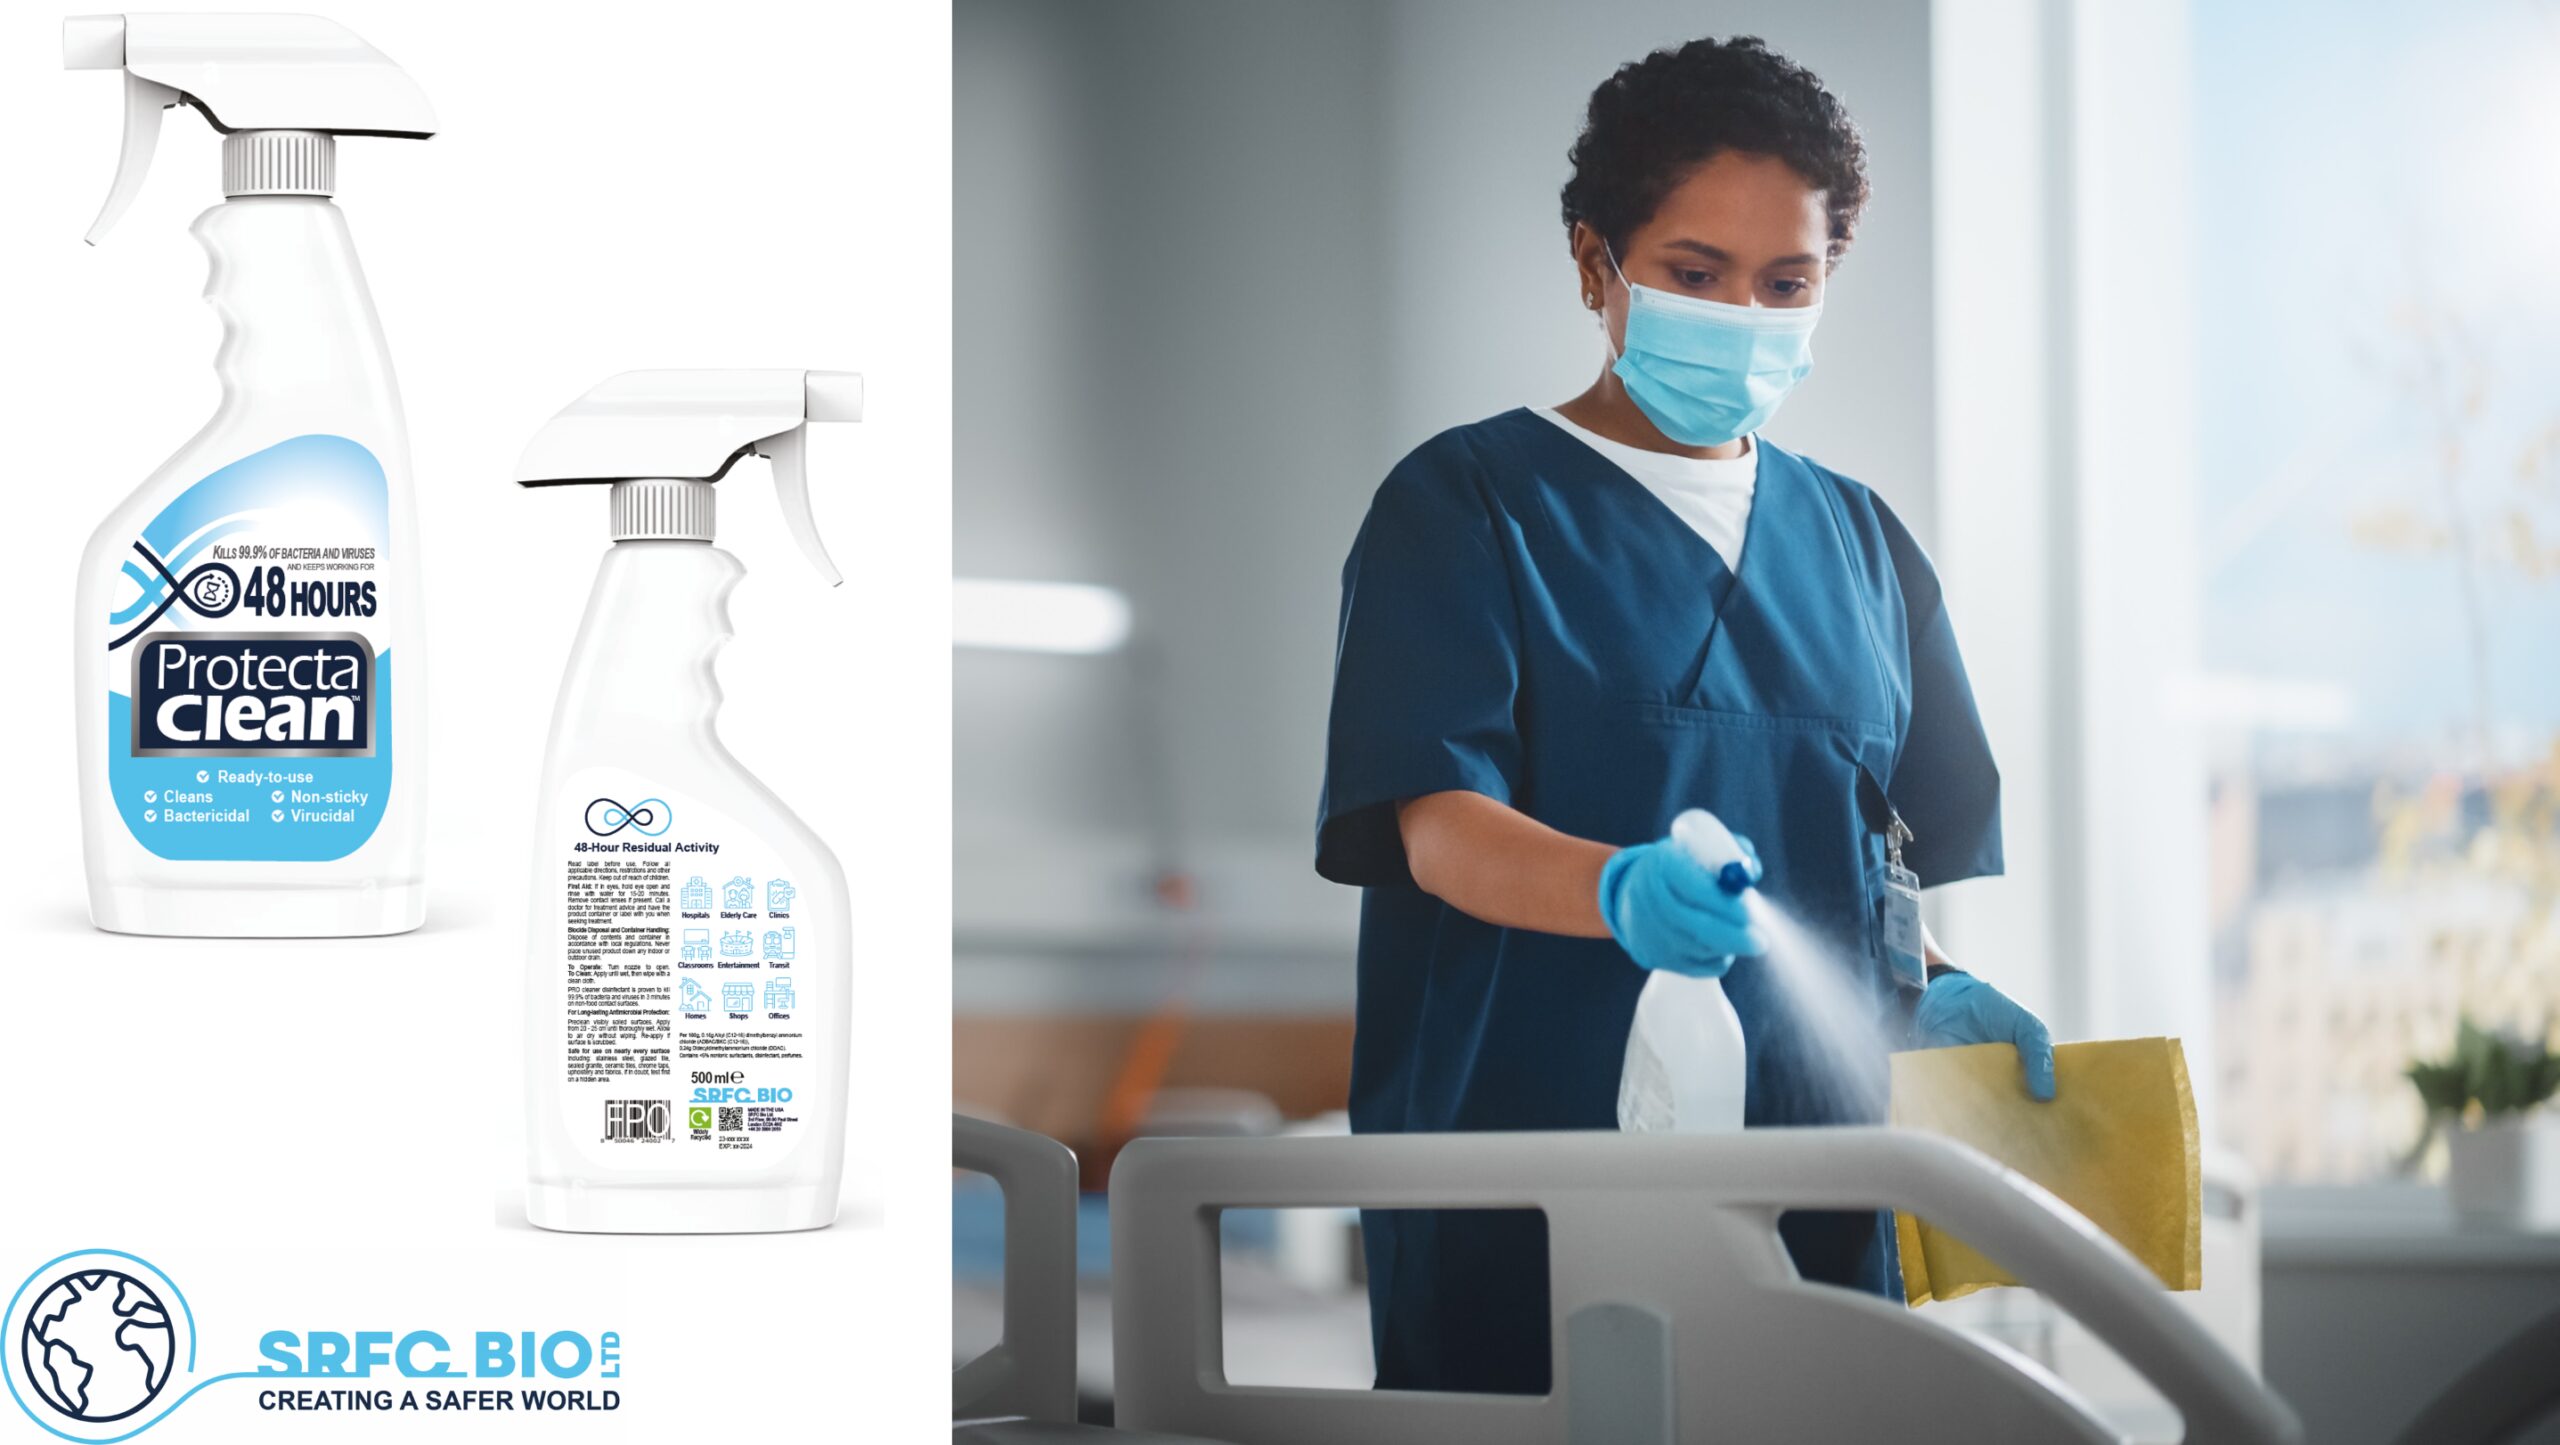 UK Launch of SRFC Bio’s Breakthrough Infection Control Technology: Protecta Clean™